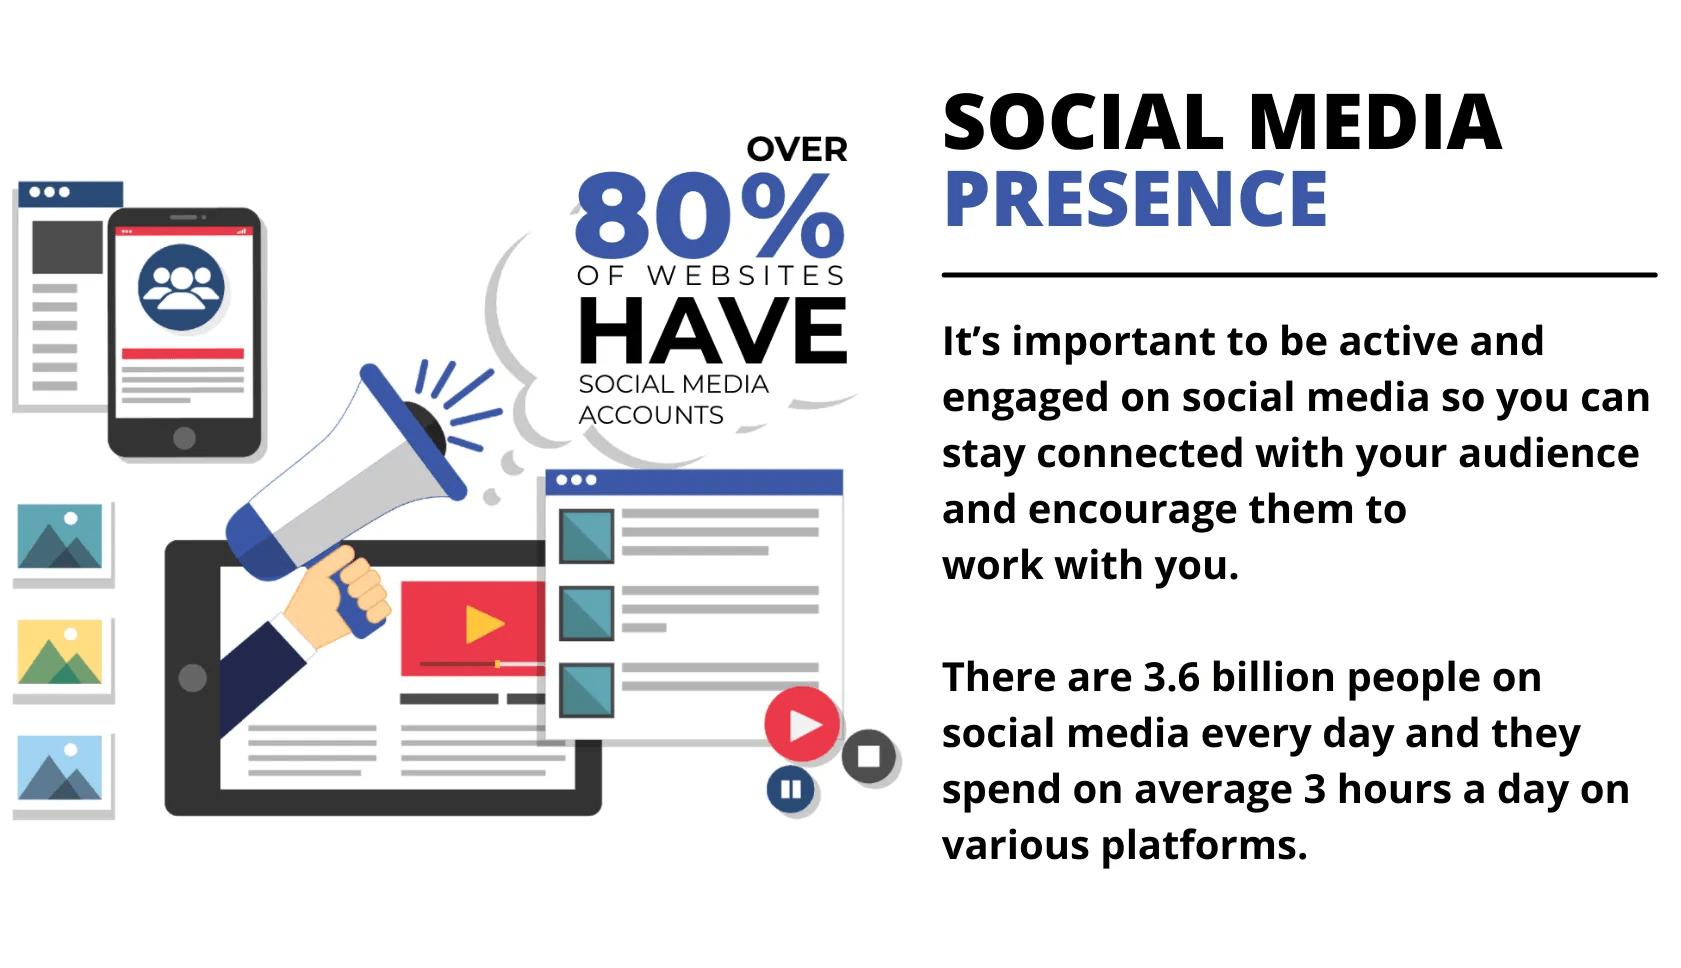 Over 80% of websites have social media accounts